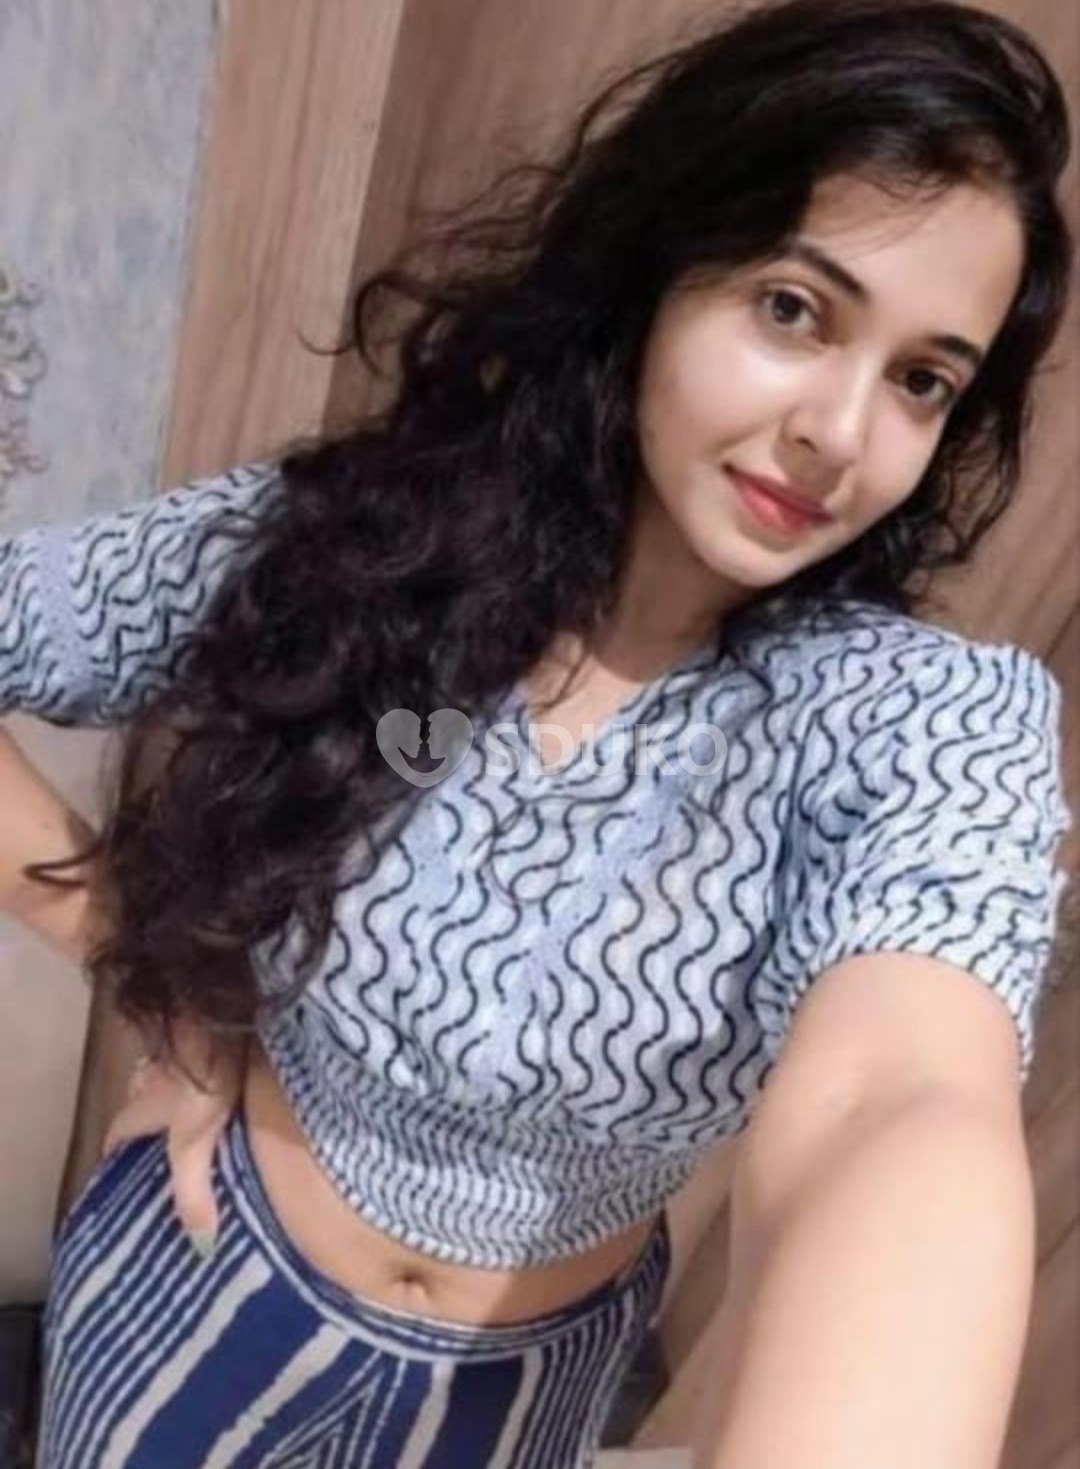 Siliguri LOW PRICE🔸kd✅( 24×7 ) SERVICE A AVAILABLE 100% SAFE AND S SECURE UNLIMITED ENJOY HOT COLLEGE GIRL HOUSEWI